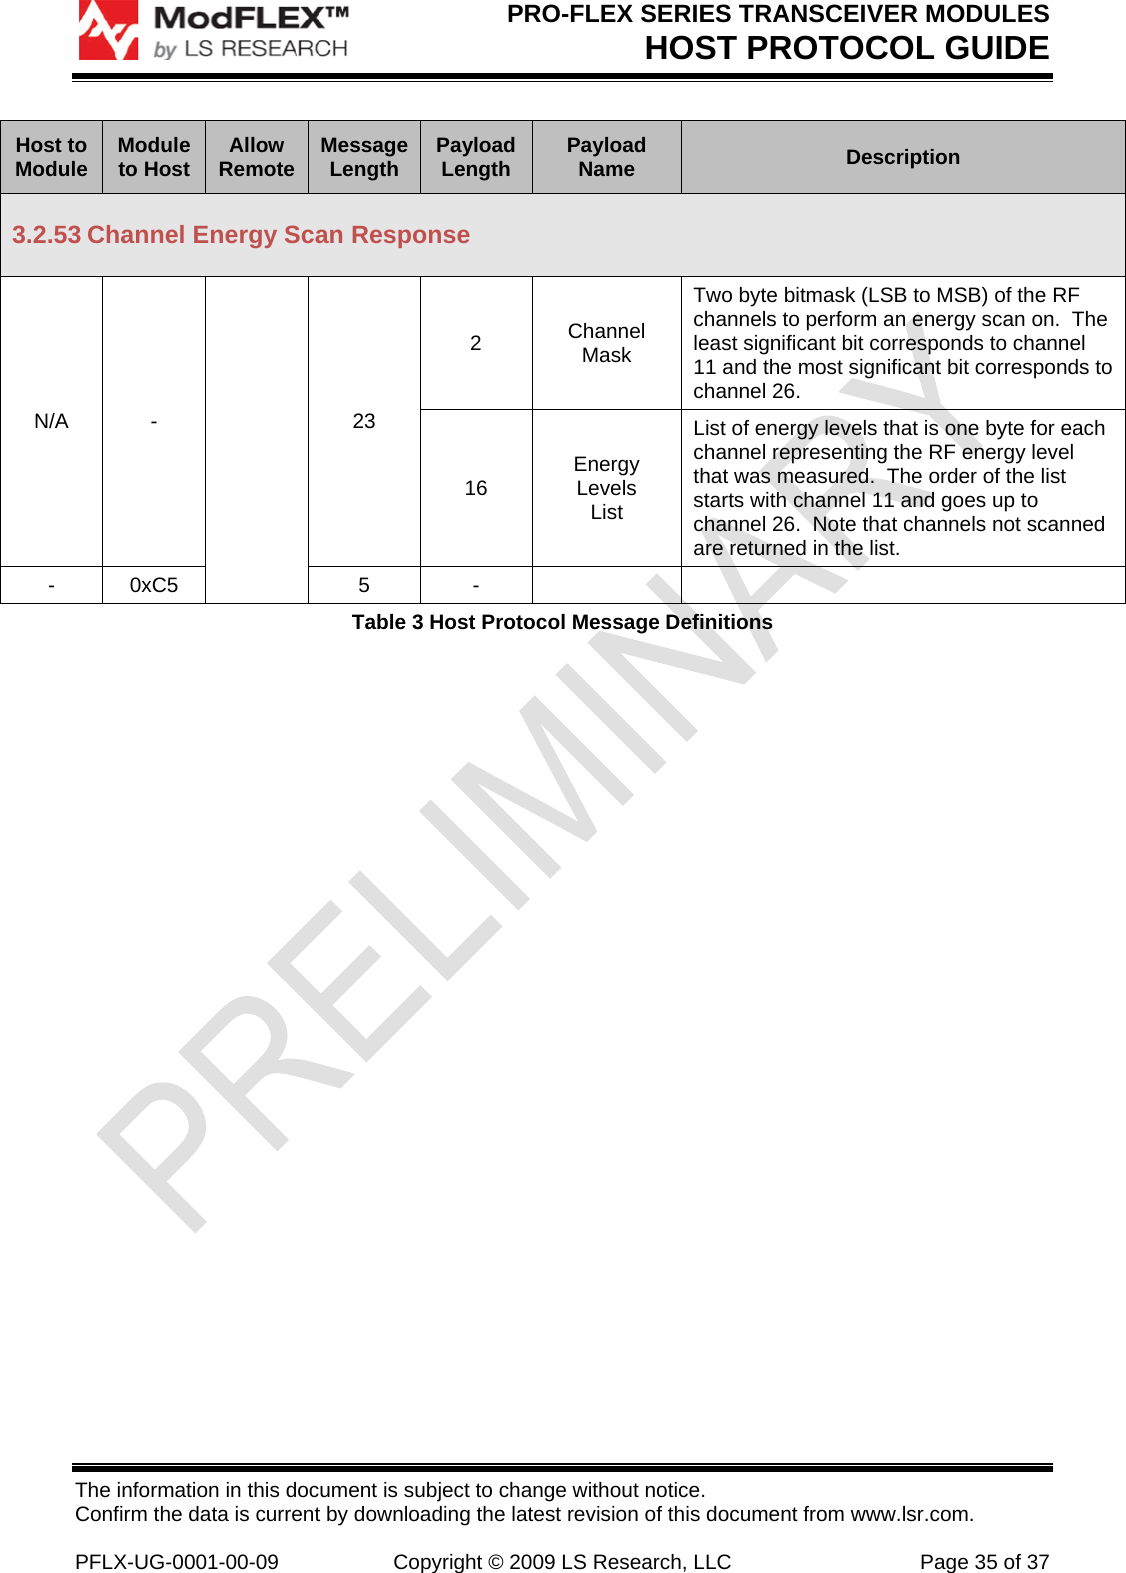 PRO-FLEX SERIES TRANSCEIVER MODULES HOST PROTOCOL GUIDE The information in this document is subject to change without notice. Confirm the data is current by downloading the latest revision of this document from www.lsr.com.  PFLX-UG-0001-00-09  Copyright © 2009 LS Research, LLC  Page 35 of 37 Host to Module  Module to Host  Allow Remote  Message Length  Payload Length  Payload Name  Description 3.2.53 Channel Energy Scan Response N/A -   23 2  Channel Mask Two byte bitmask (LSB to MSB) of the RF channels to perform an energy scan on.  The least significant bit corresponds to channel 11 and the most significant bit corresponds to channel 26. 16  Energy Levels List List of energy levels that is one byte for each channel representing the RF energy level that was measured.  The order of the list starts with channel 11 and goes up to channel 26.  Note that channels not scanned are returned in the list. - 0xC5  5  -     Table 3 Host Protocol Message Definitions 